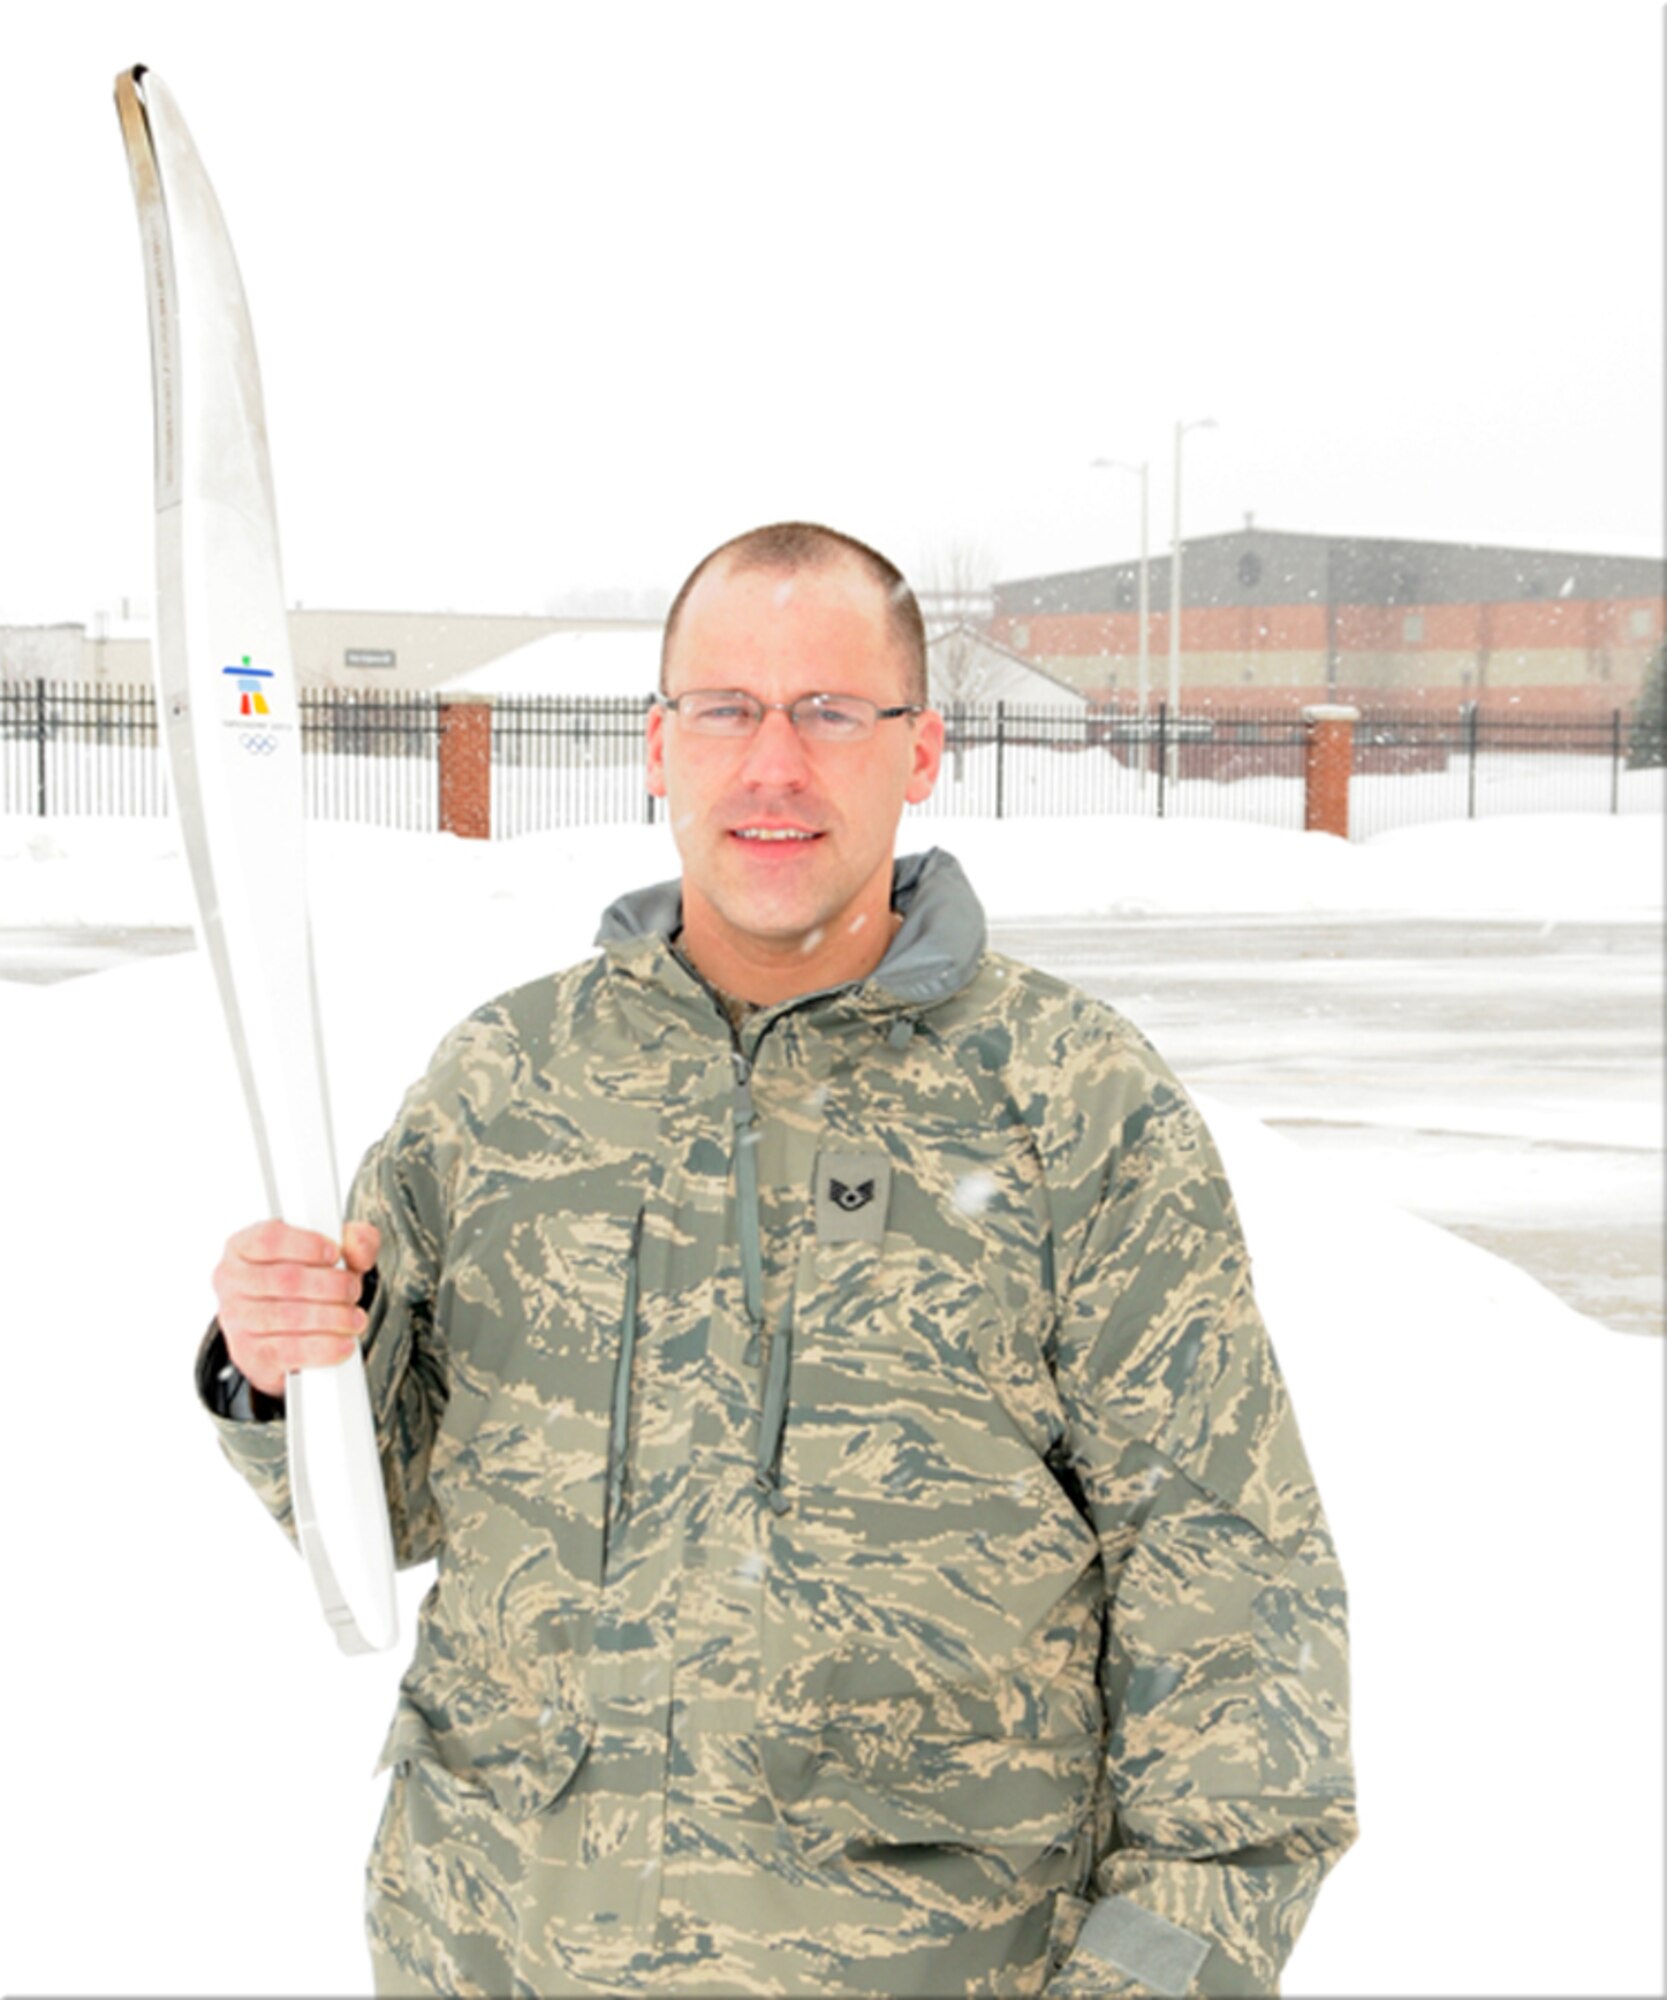 Staff Sgt. Thomas Ries, 114th Maintenance Squadron member, displayed the torch he carried for the 2010 Winter Olympics in Vancouver, British Columbia.  Sgt. Ries was chosen by his employer to be one of the torch bearers for this historic event.